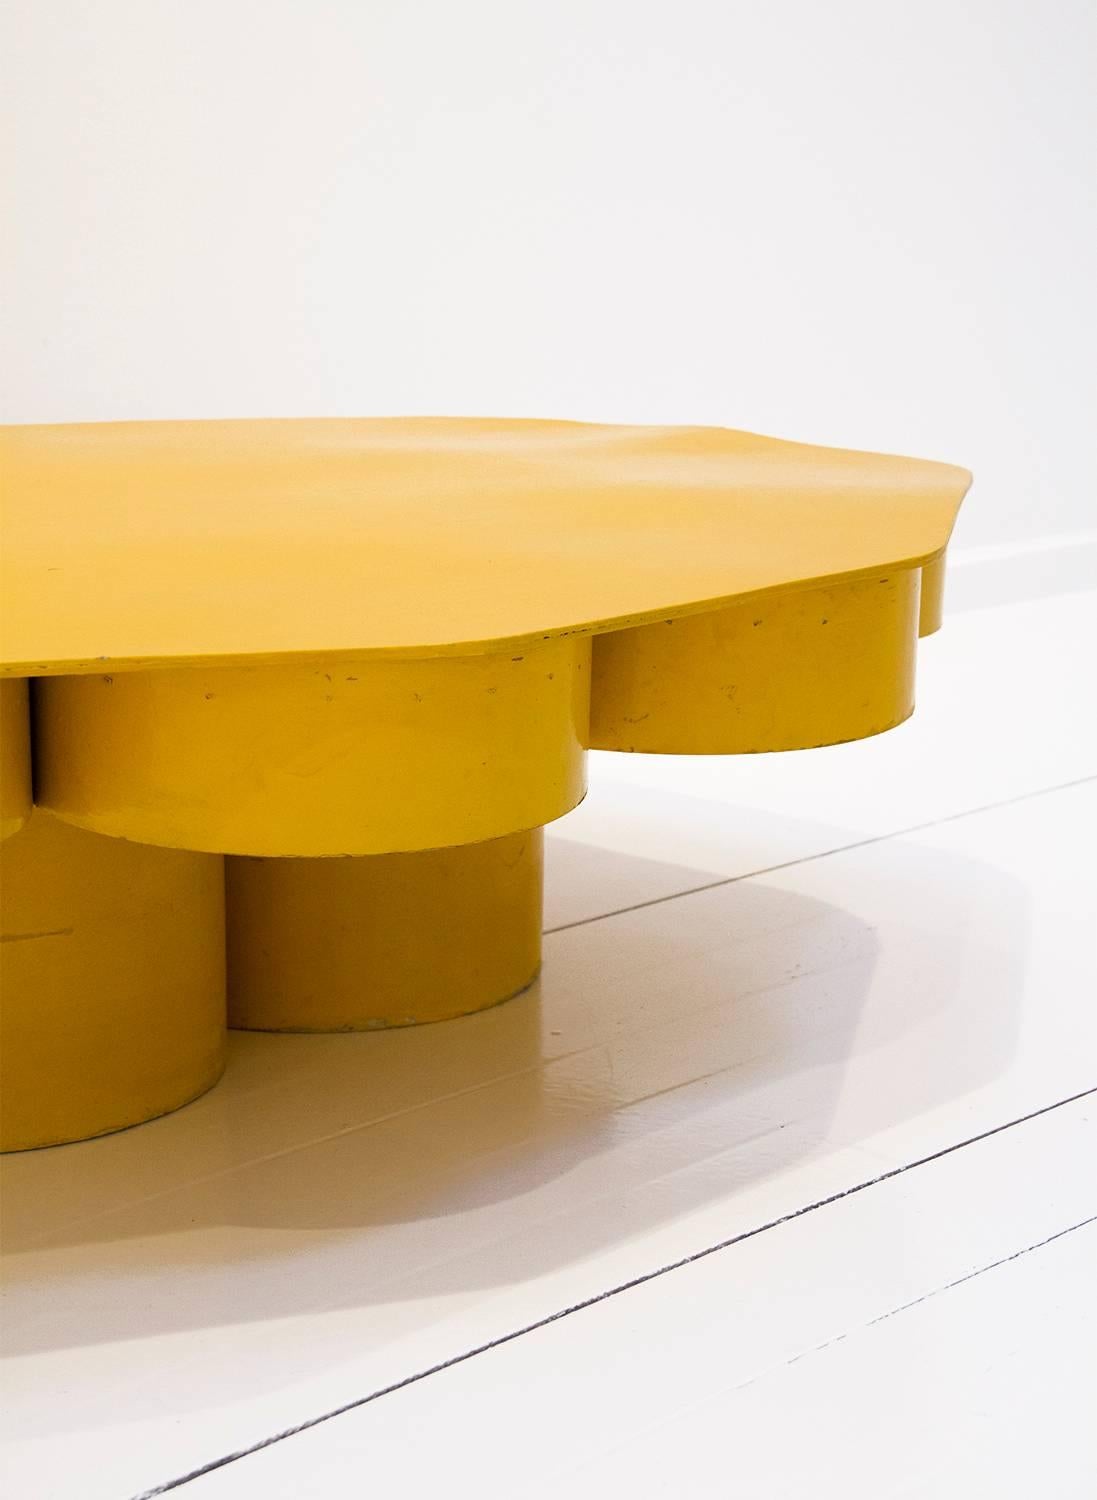 Italian Yellow Coffee Table Designed by Jean-Louis Avril in 1968, Milan, Italy